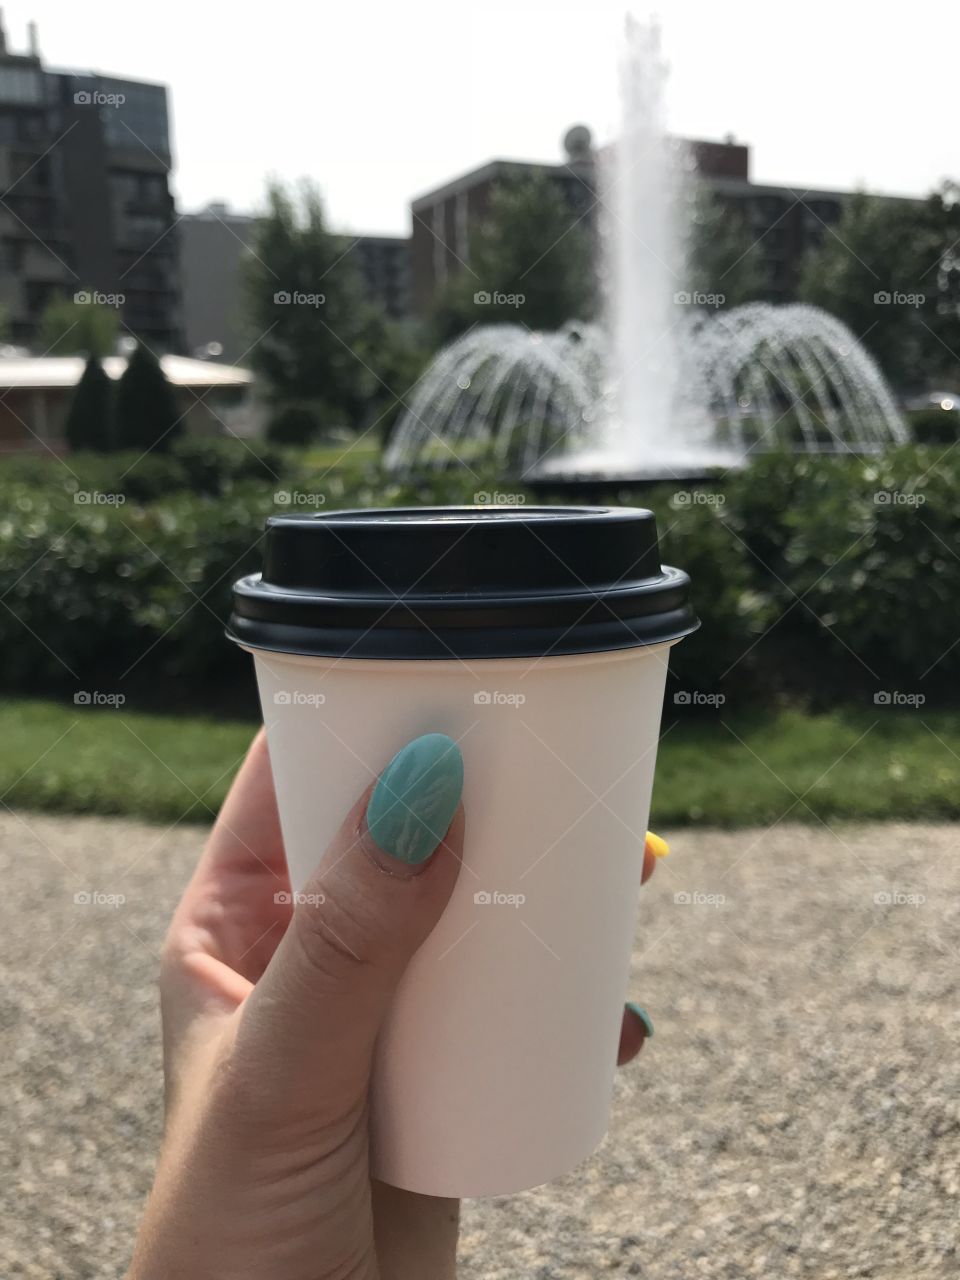 Nothing like taking in the colorful view with your morning coffee. Enjoying the sights downtown.